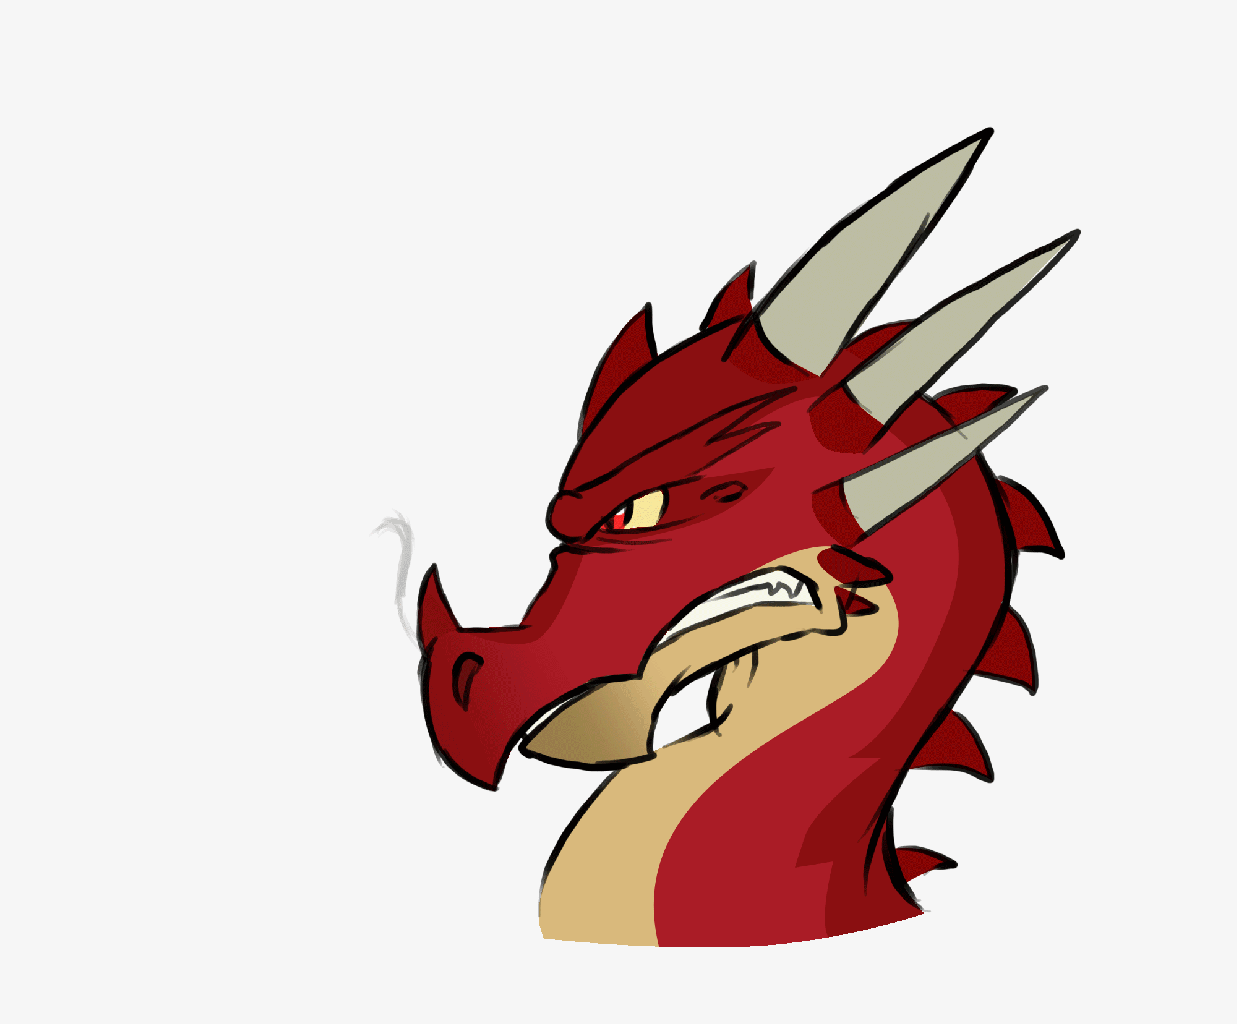 How To Draw A Dragon Breathing Fire - Apk Downloader